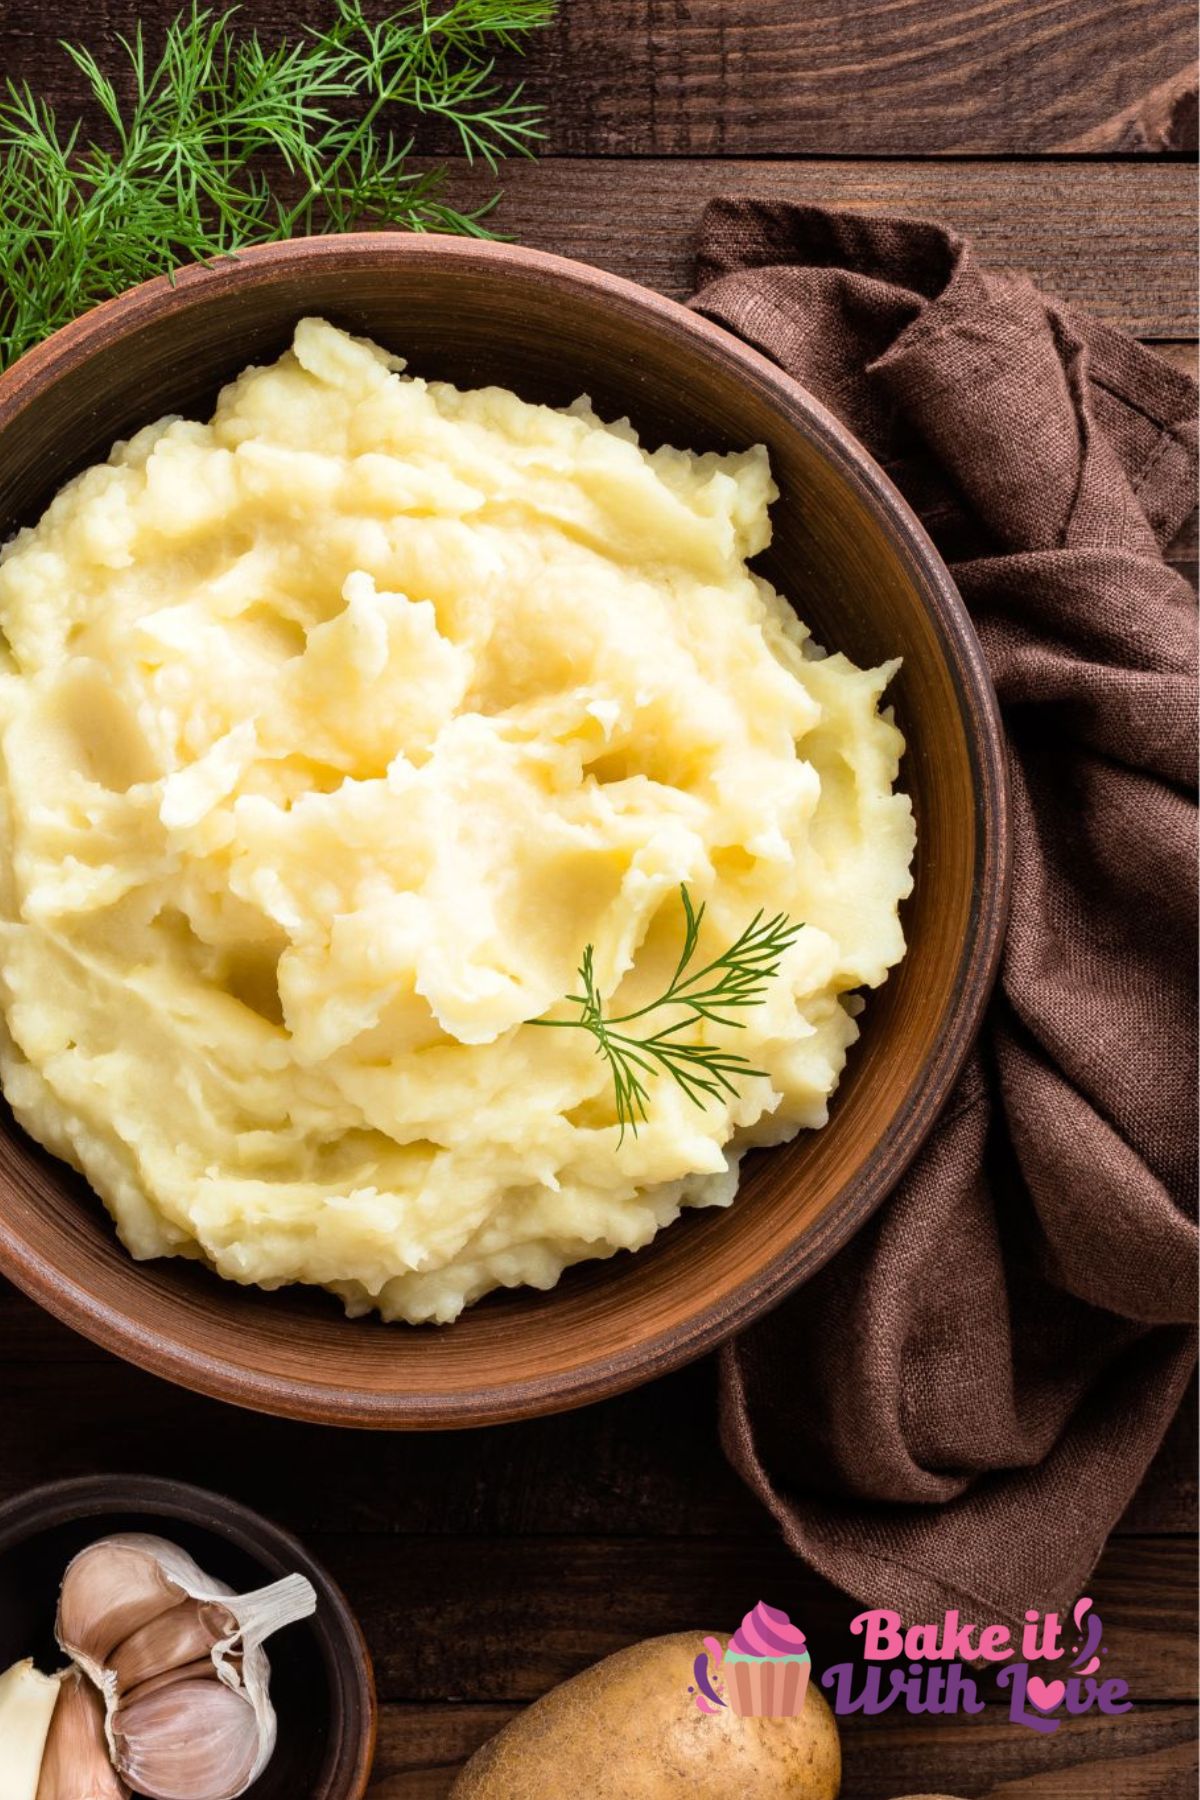 Tall overhead of the dished up Instant Pot mashed potatoes garnished with dill sprig.